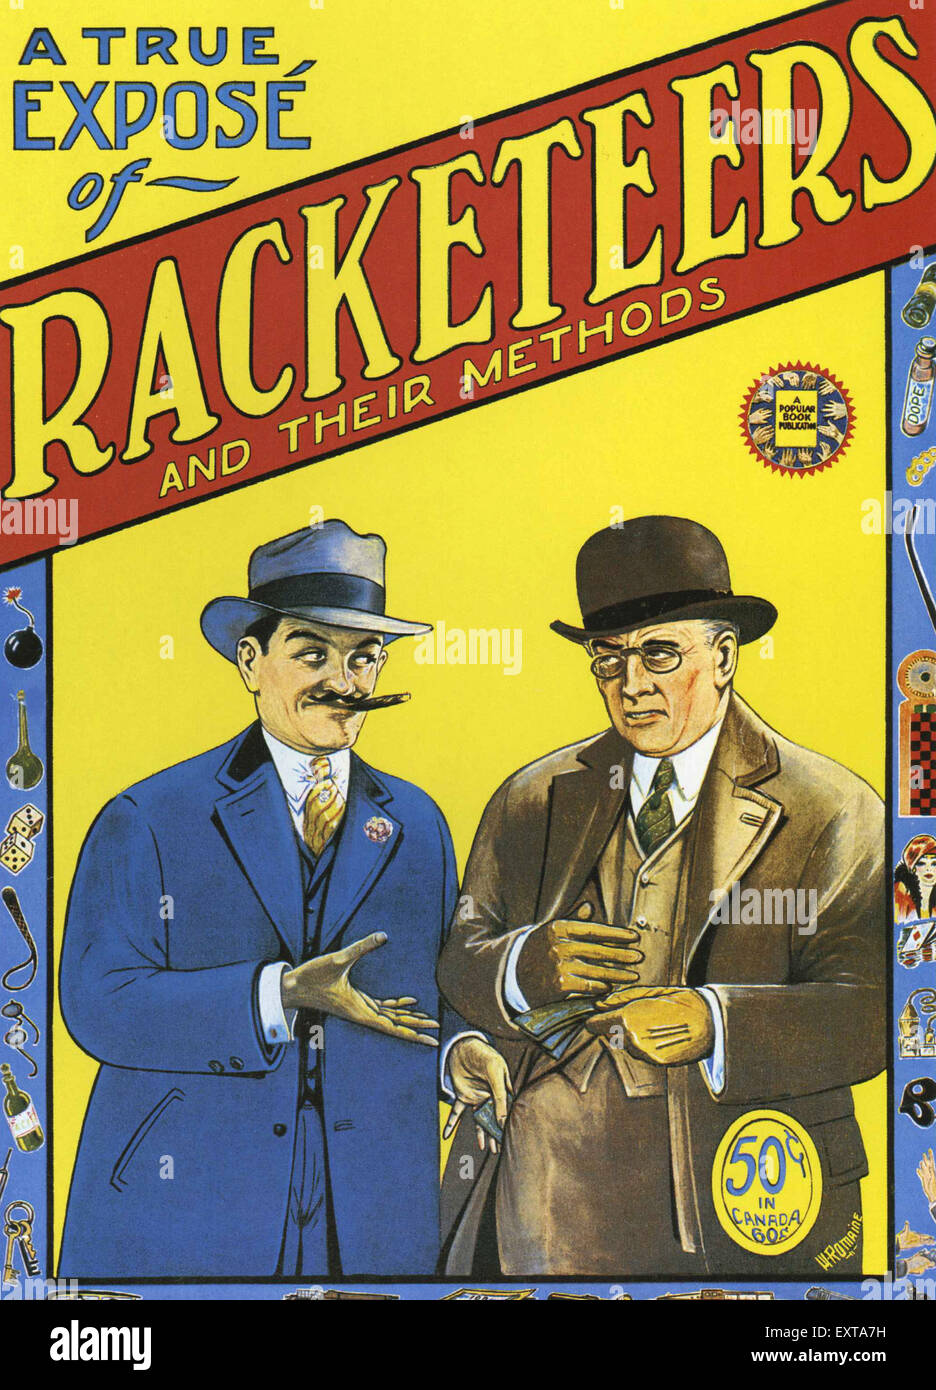 1940s USA A True Exposé of Racketeers Magazine Cover Stock Photo